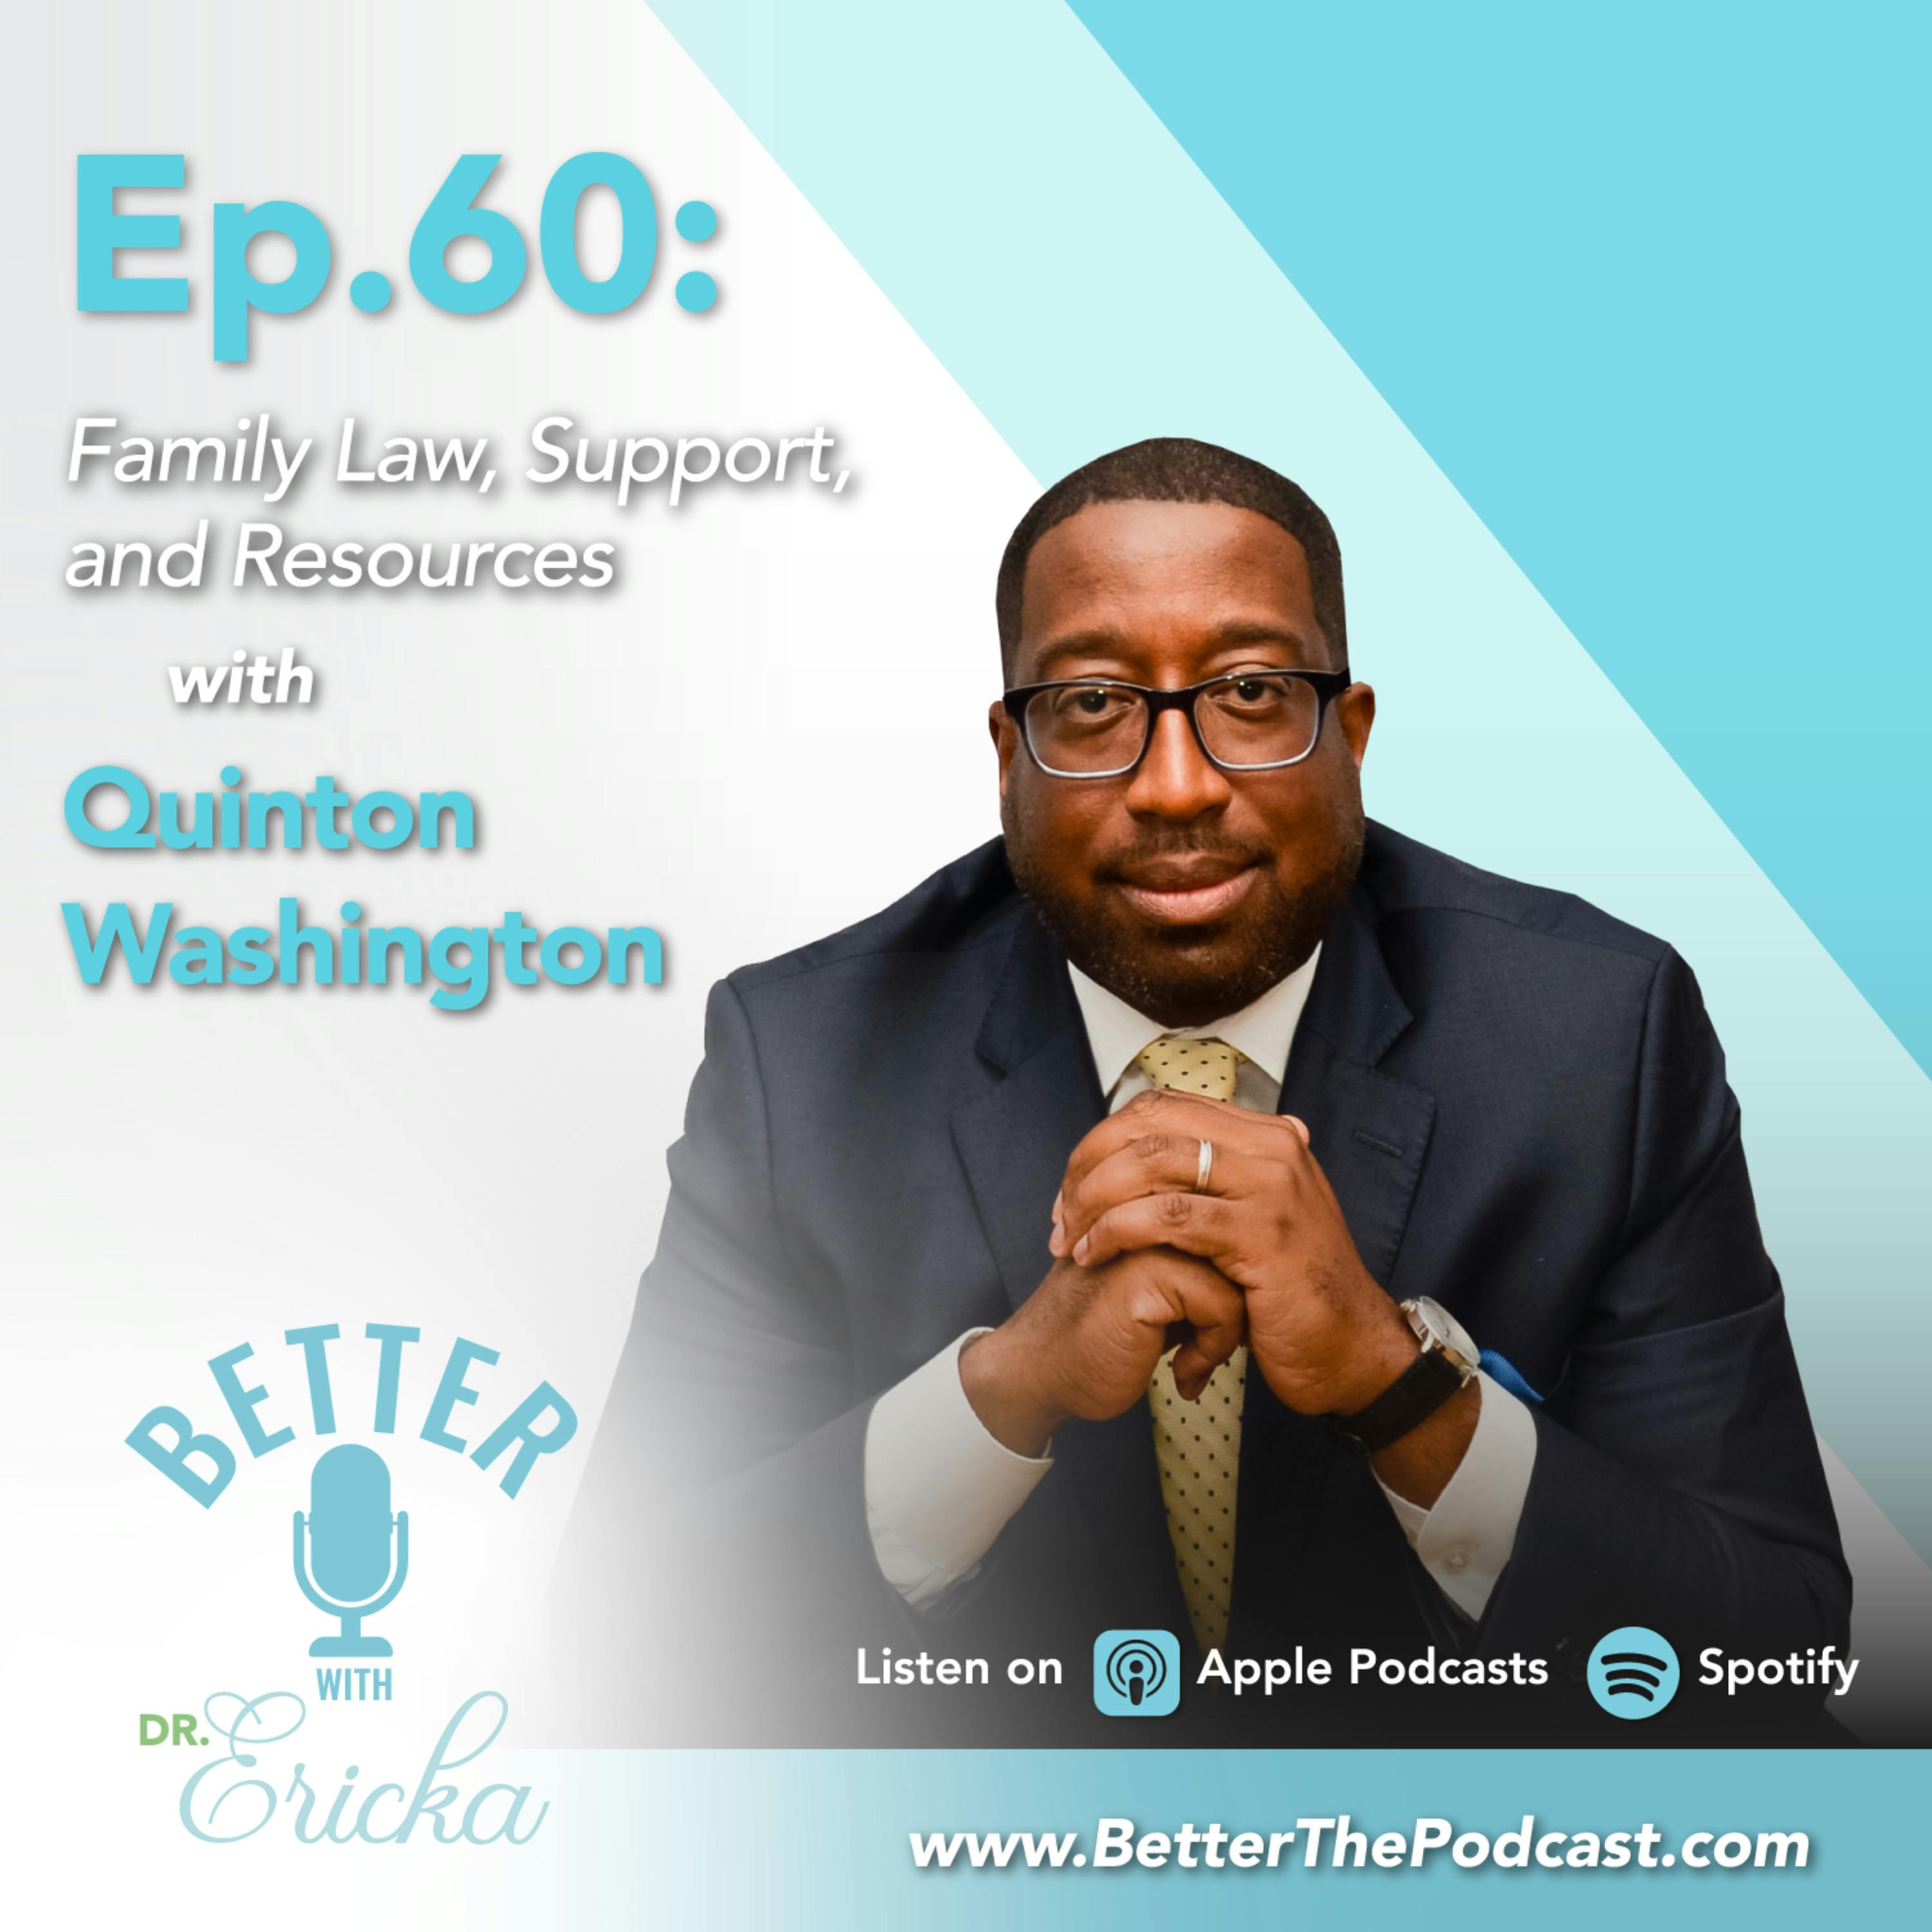 Family Law, Support, and Resources with Quinton Washington